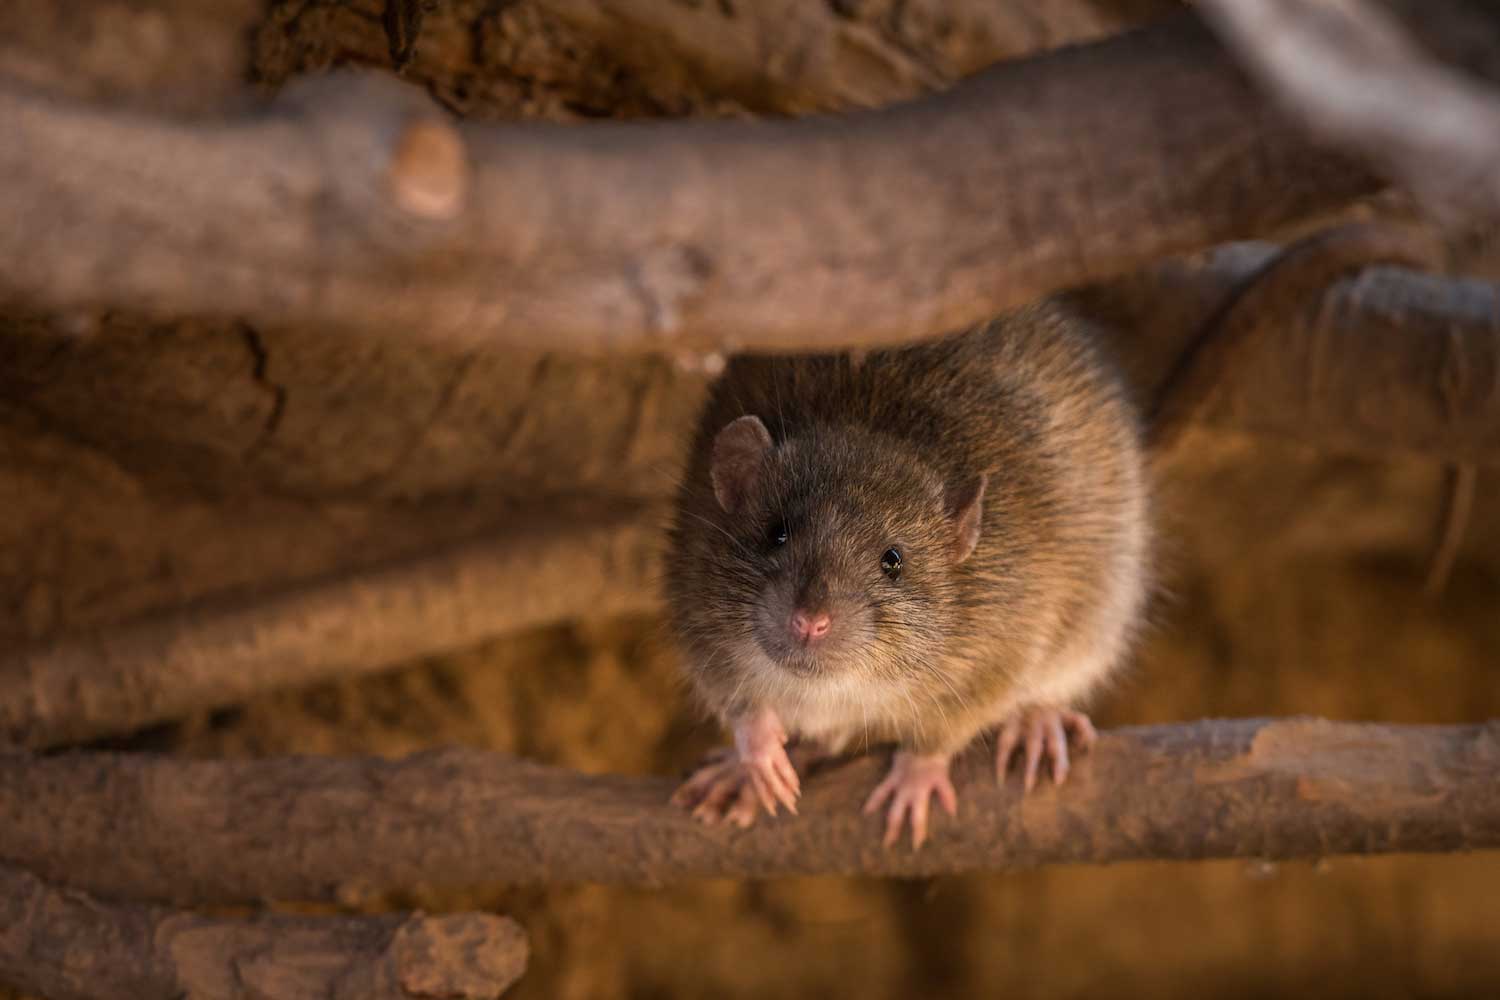 Using rat poison to control rodent infestations can have